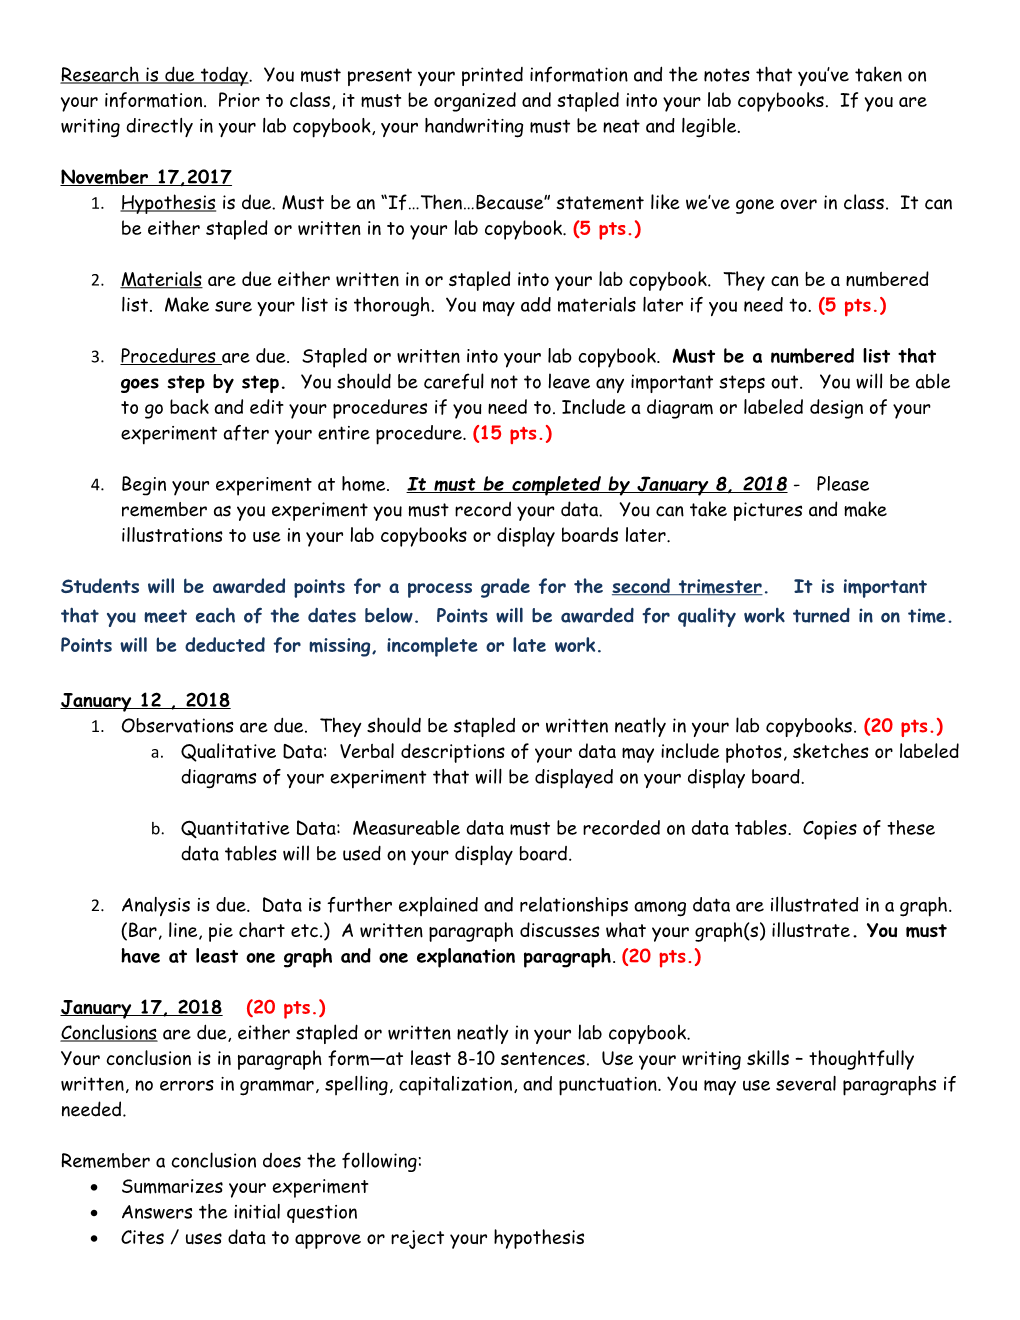 Science Fair Pacing Timeline & Process Grading